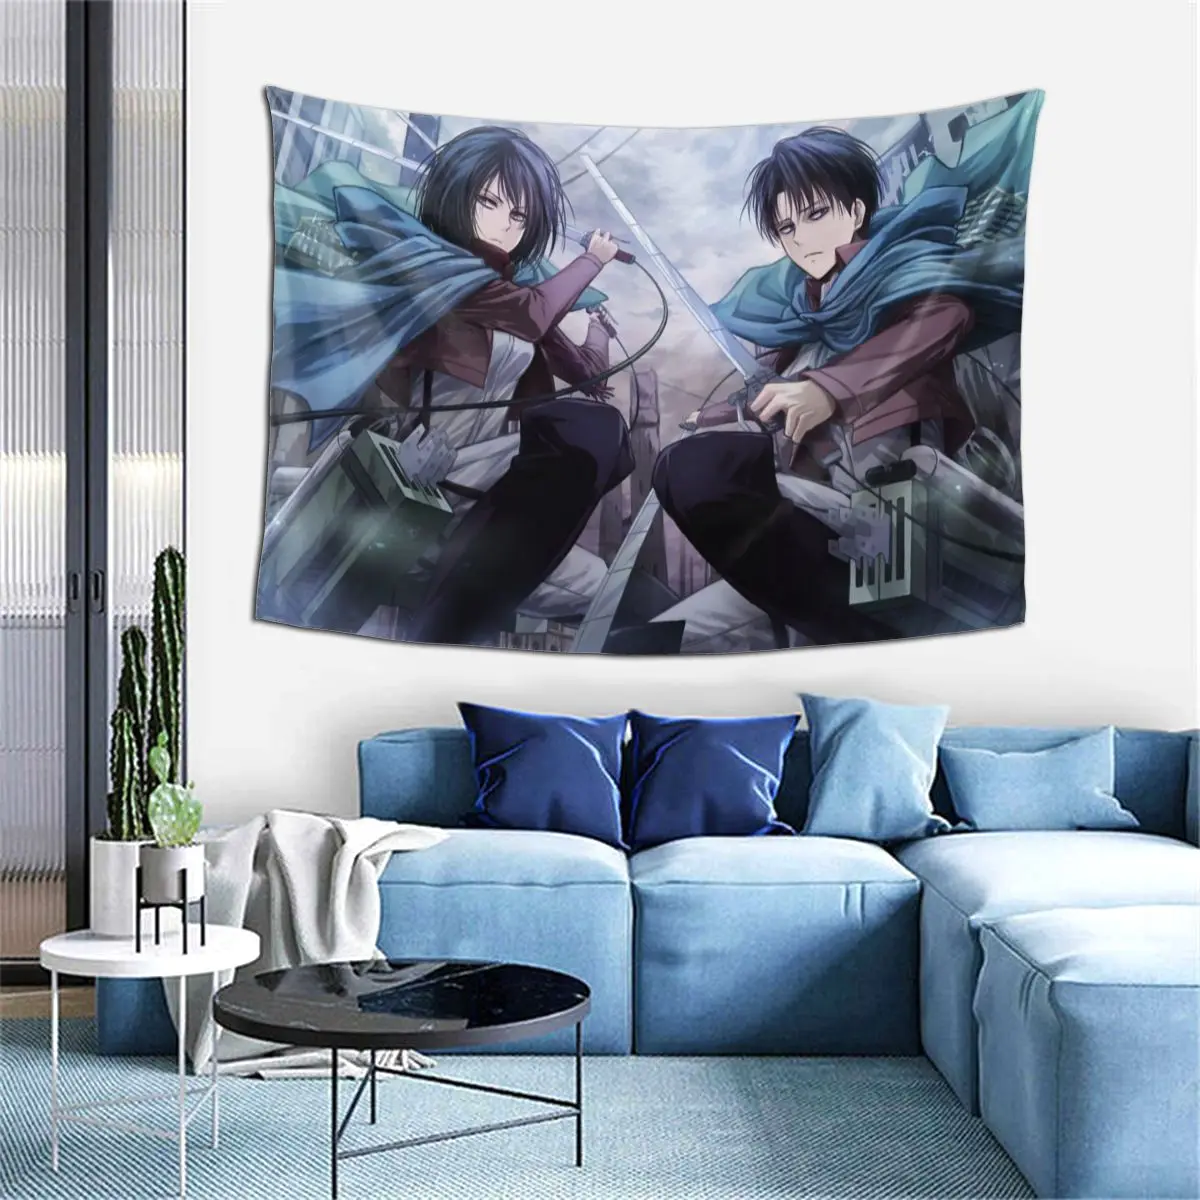 

Attack On Titan SnK Anime Tapestry Levi Mikasa Wall Arts Decor Home Hanging Cloth Background Covering Aesthetic